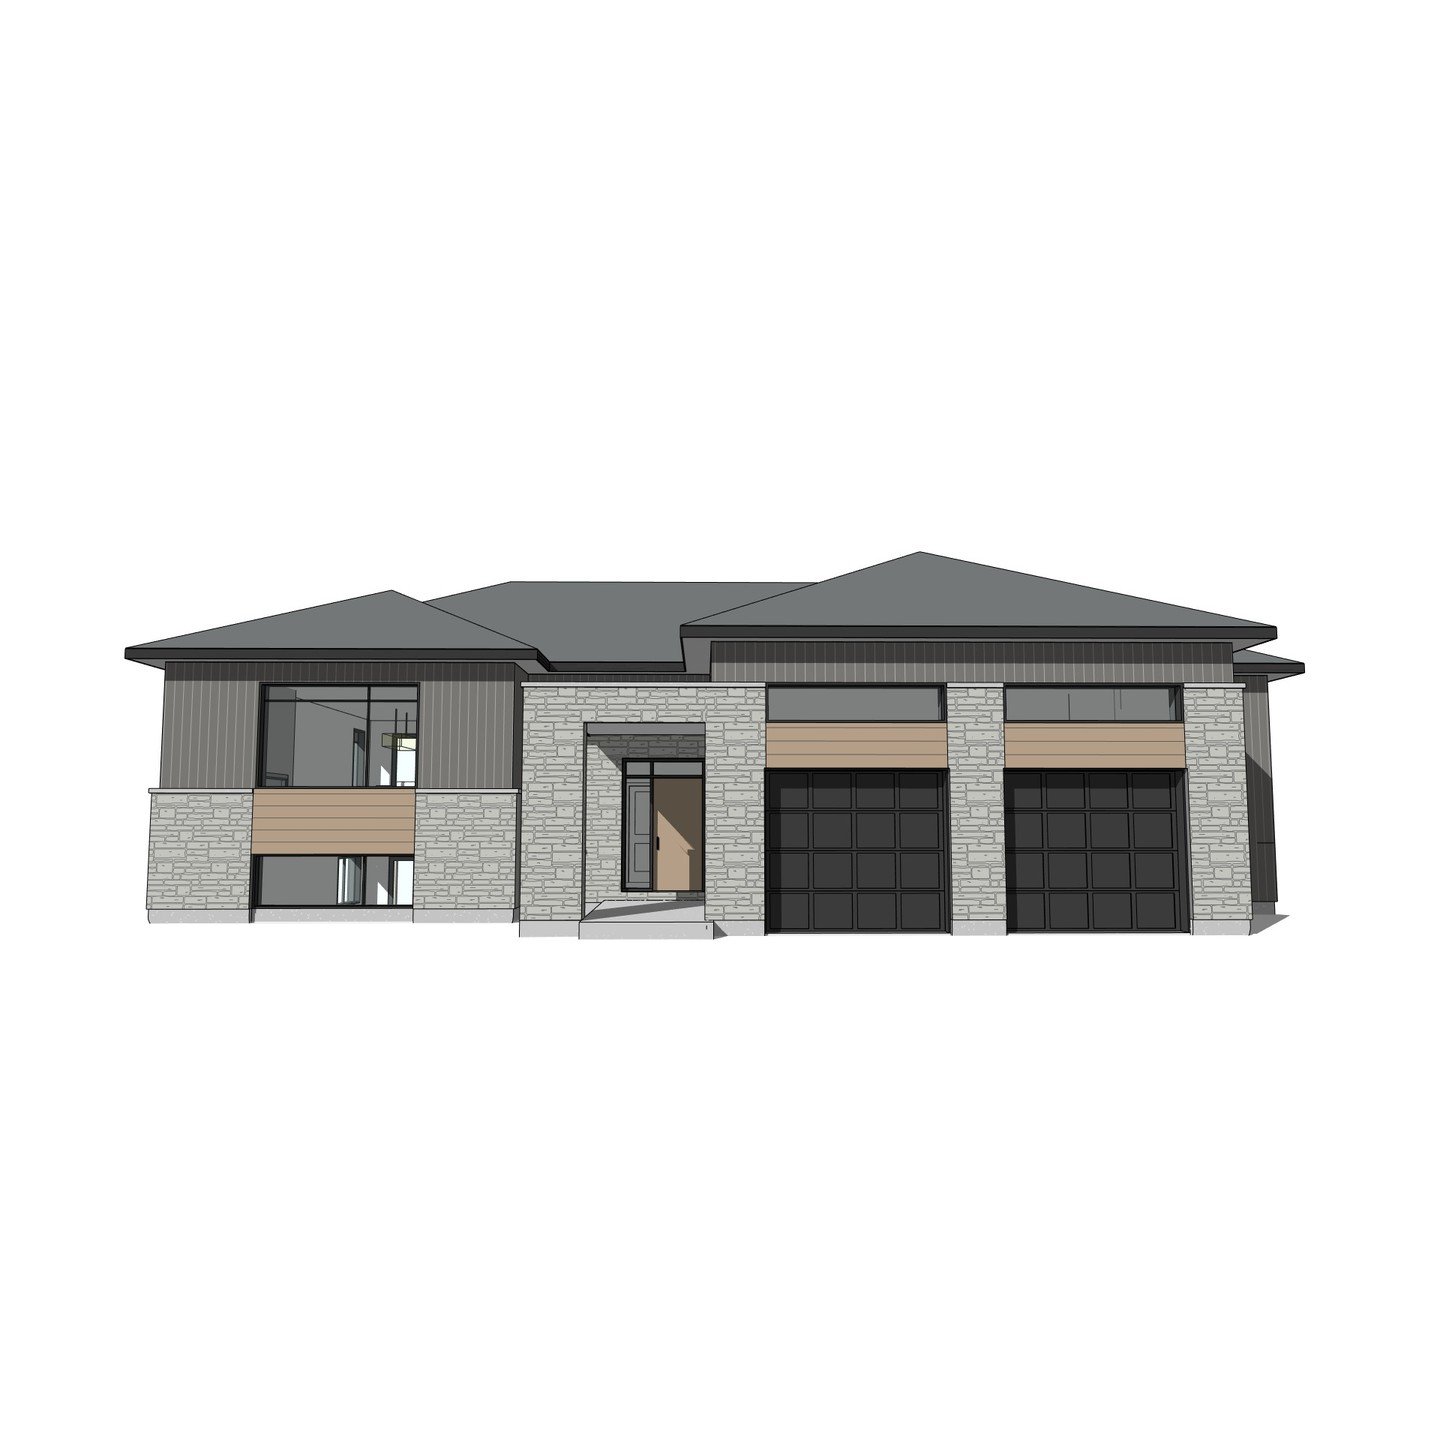 1 storey single family residence with attached garage and split-level entry. #residence #garage #modern #contemporary #stone #brick #metal #wood #perspective #revit #architecture #aja #adamjodoinarchitectural #design